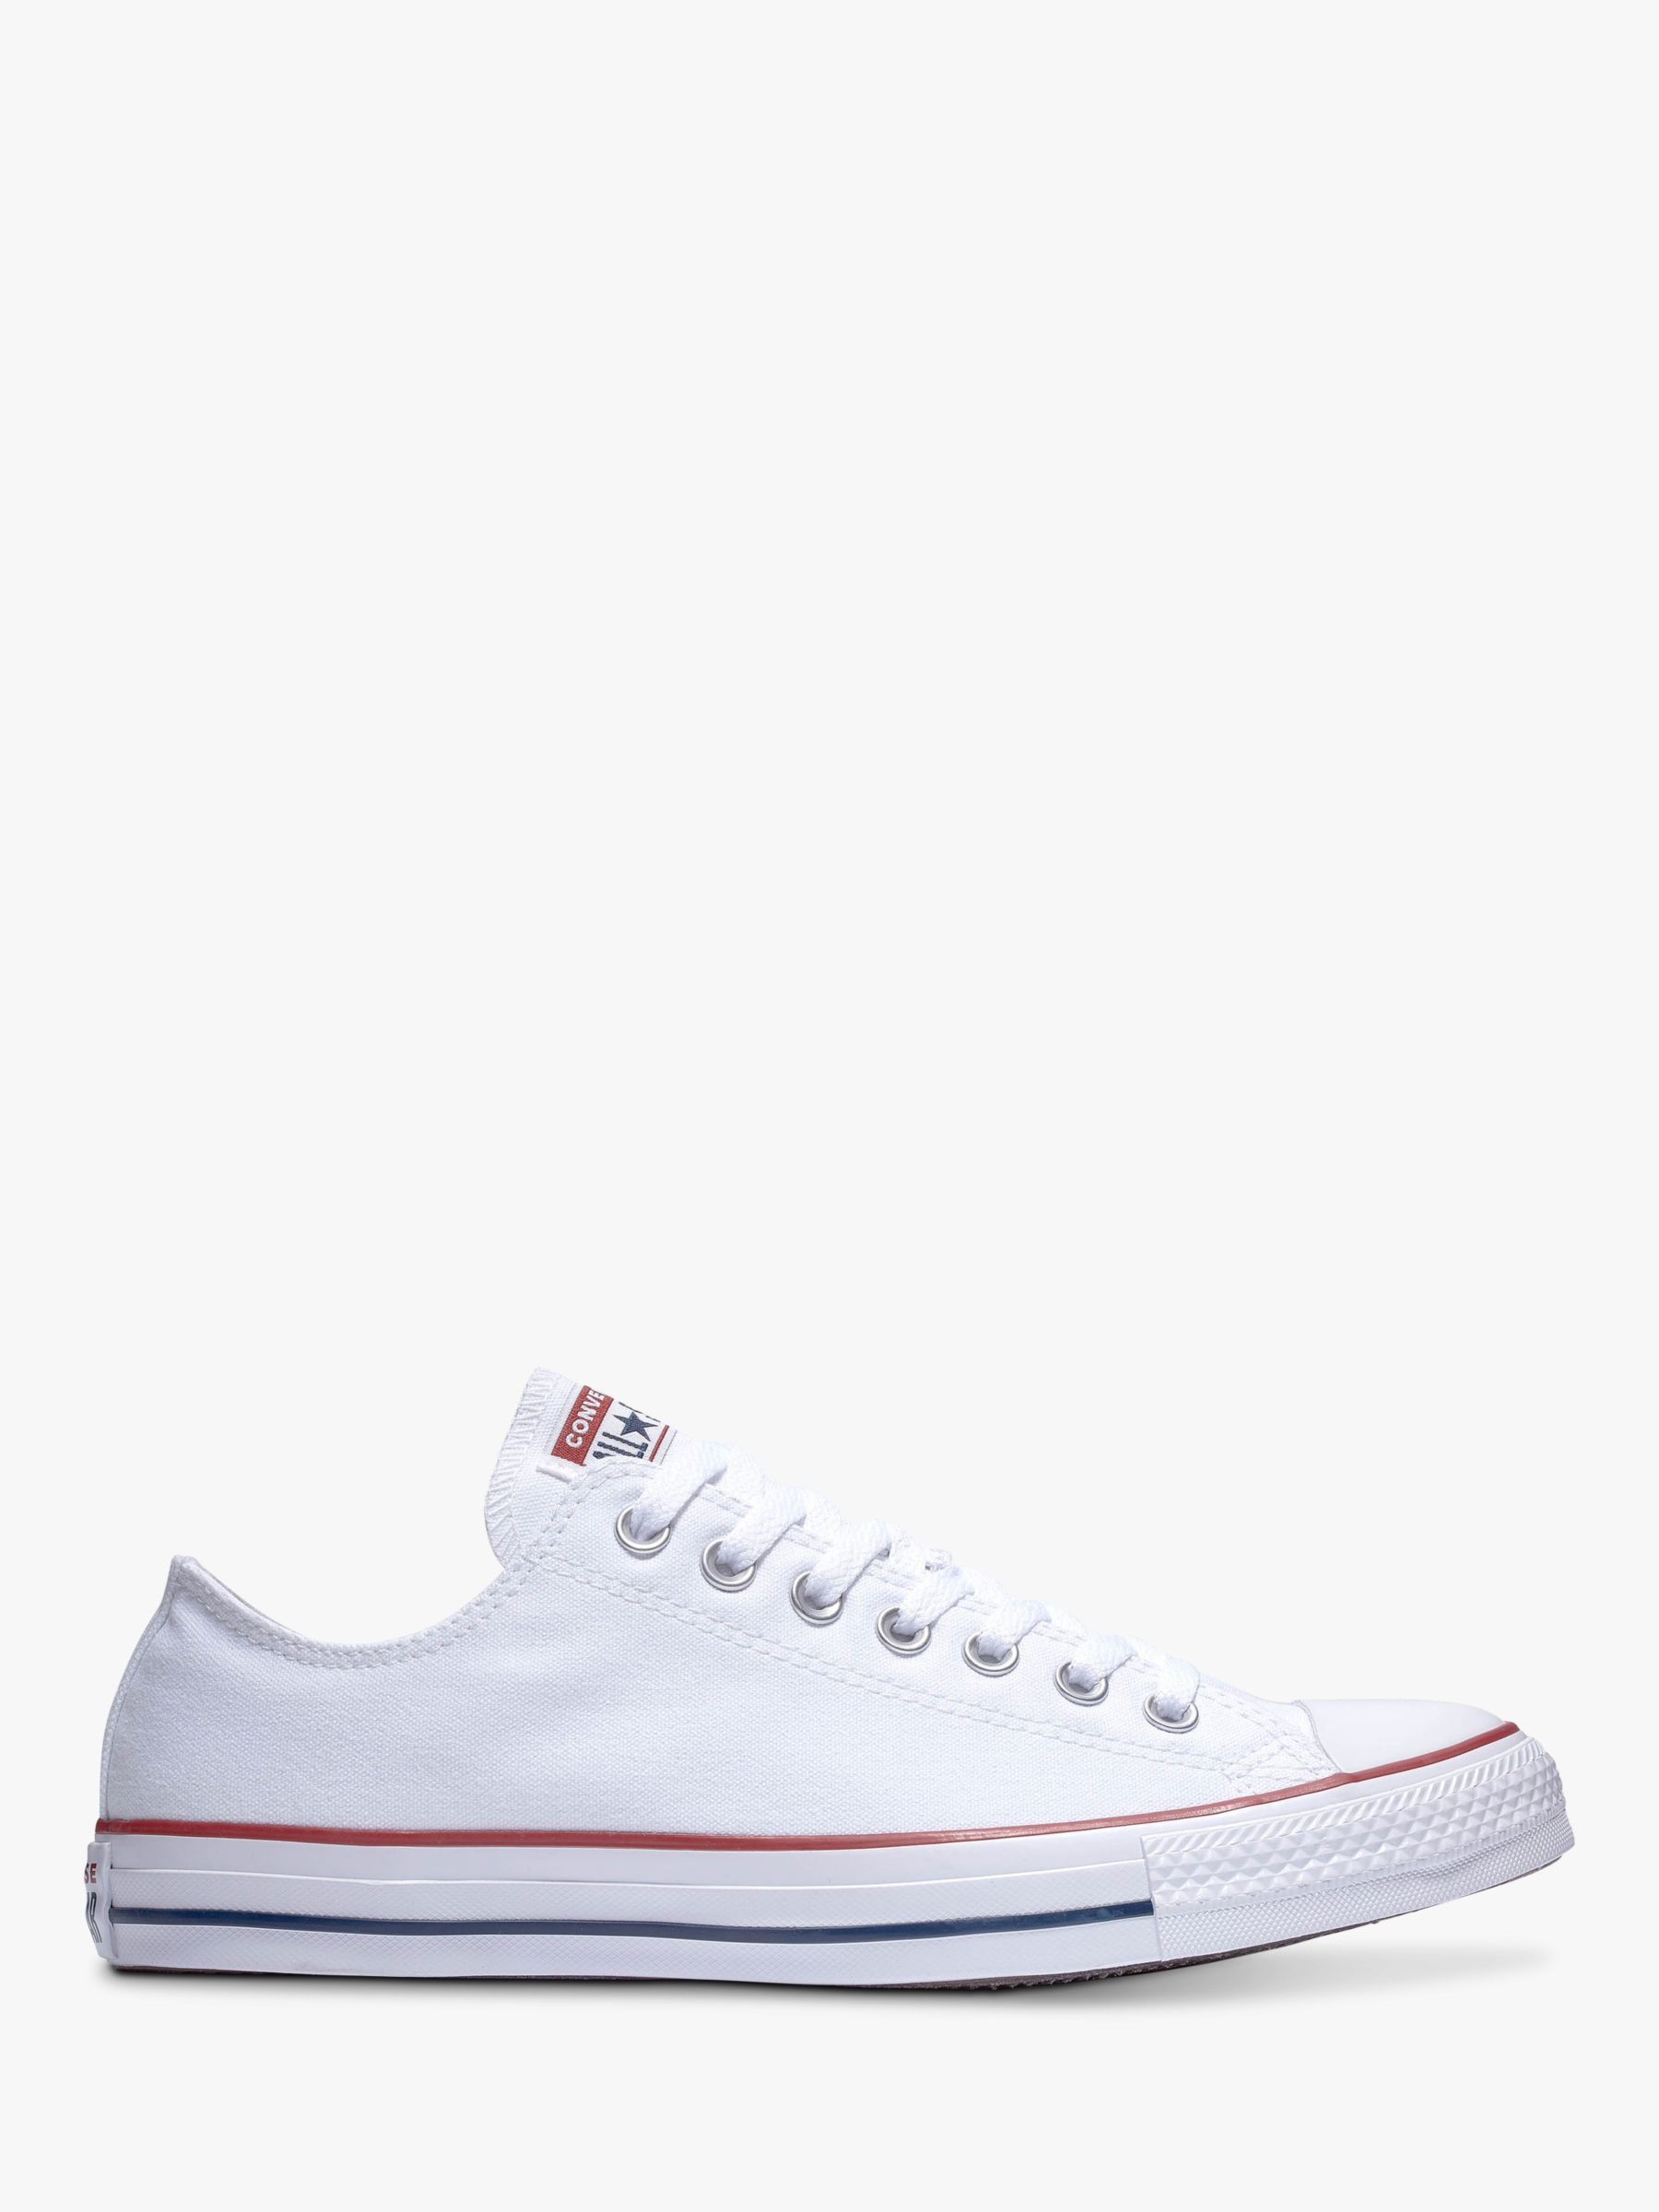 Buy Converse Chuck Taylor All Star Canvas Ox Low-Top Trainers | John Lewis